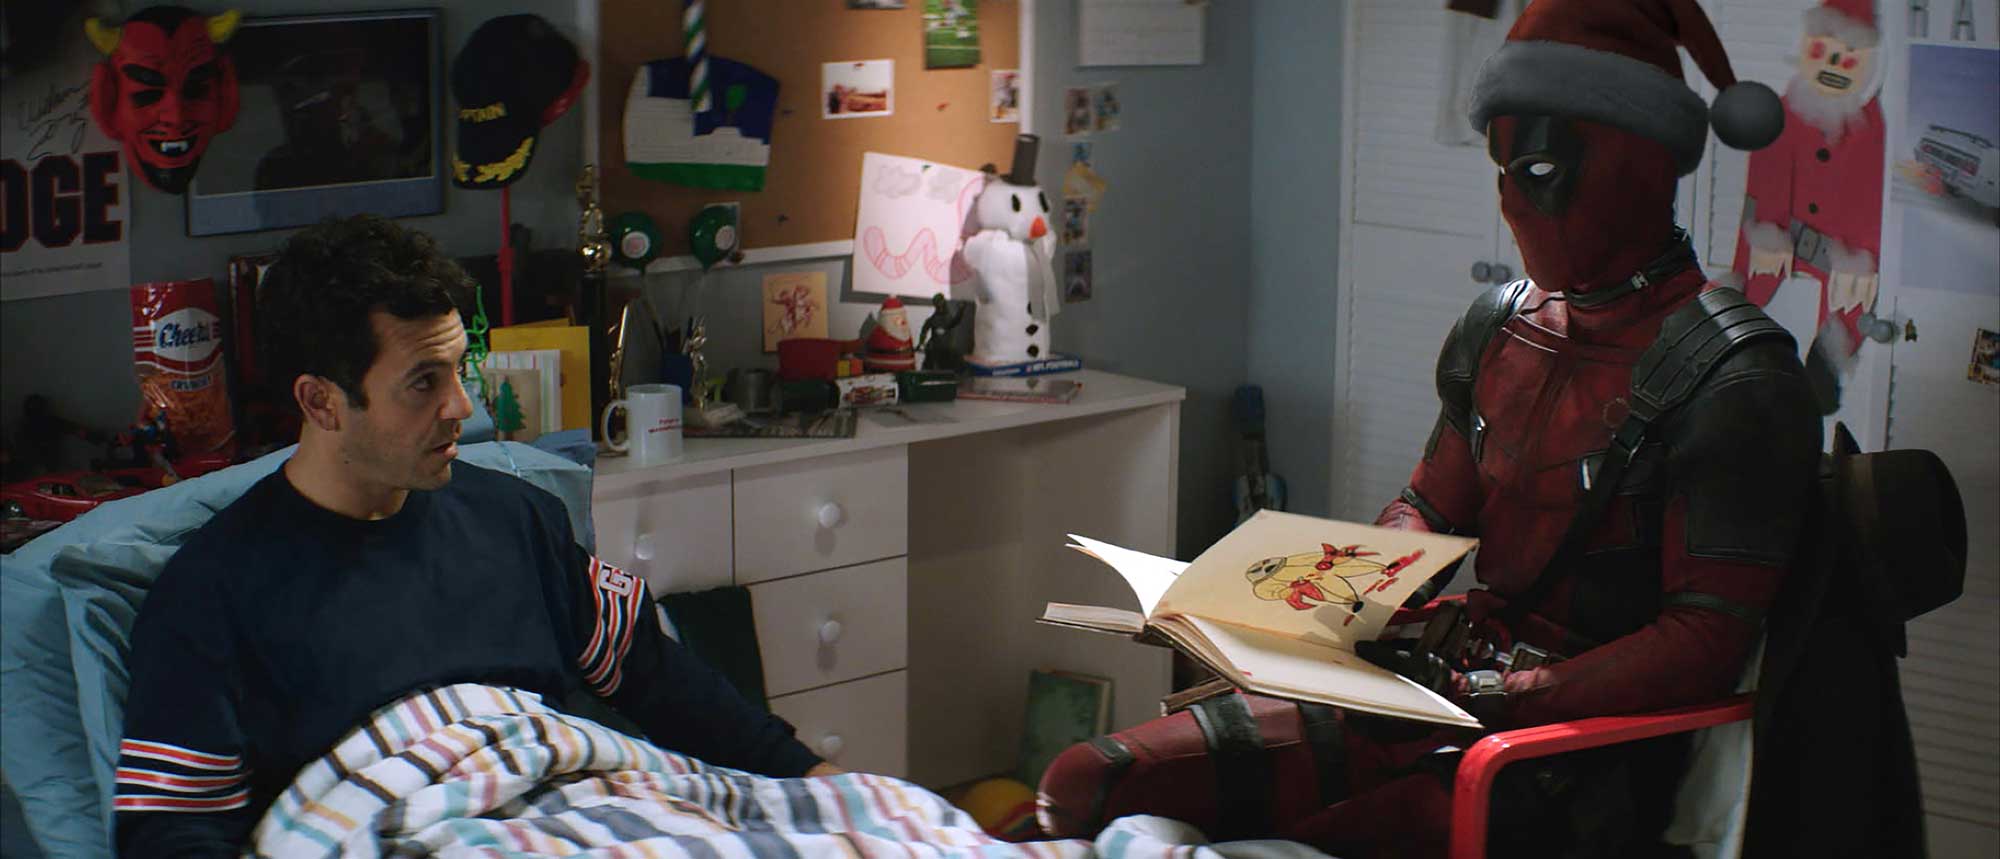 PHOTO: Fred Savage and Deadpool in "Once Upon a Deadpoo.l" Photo courtesy of Twentieth Century Fox